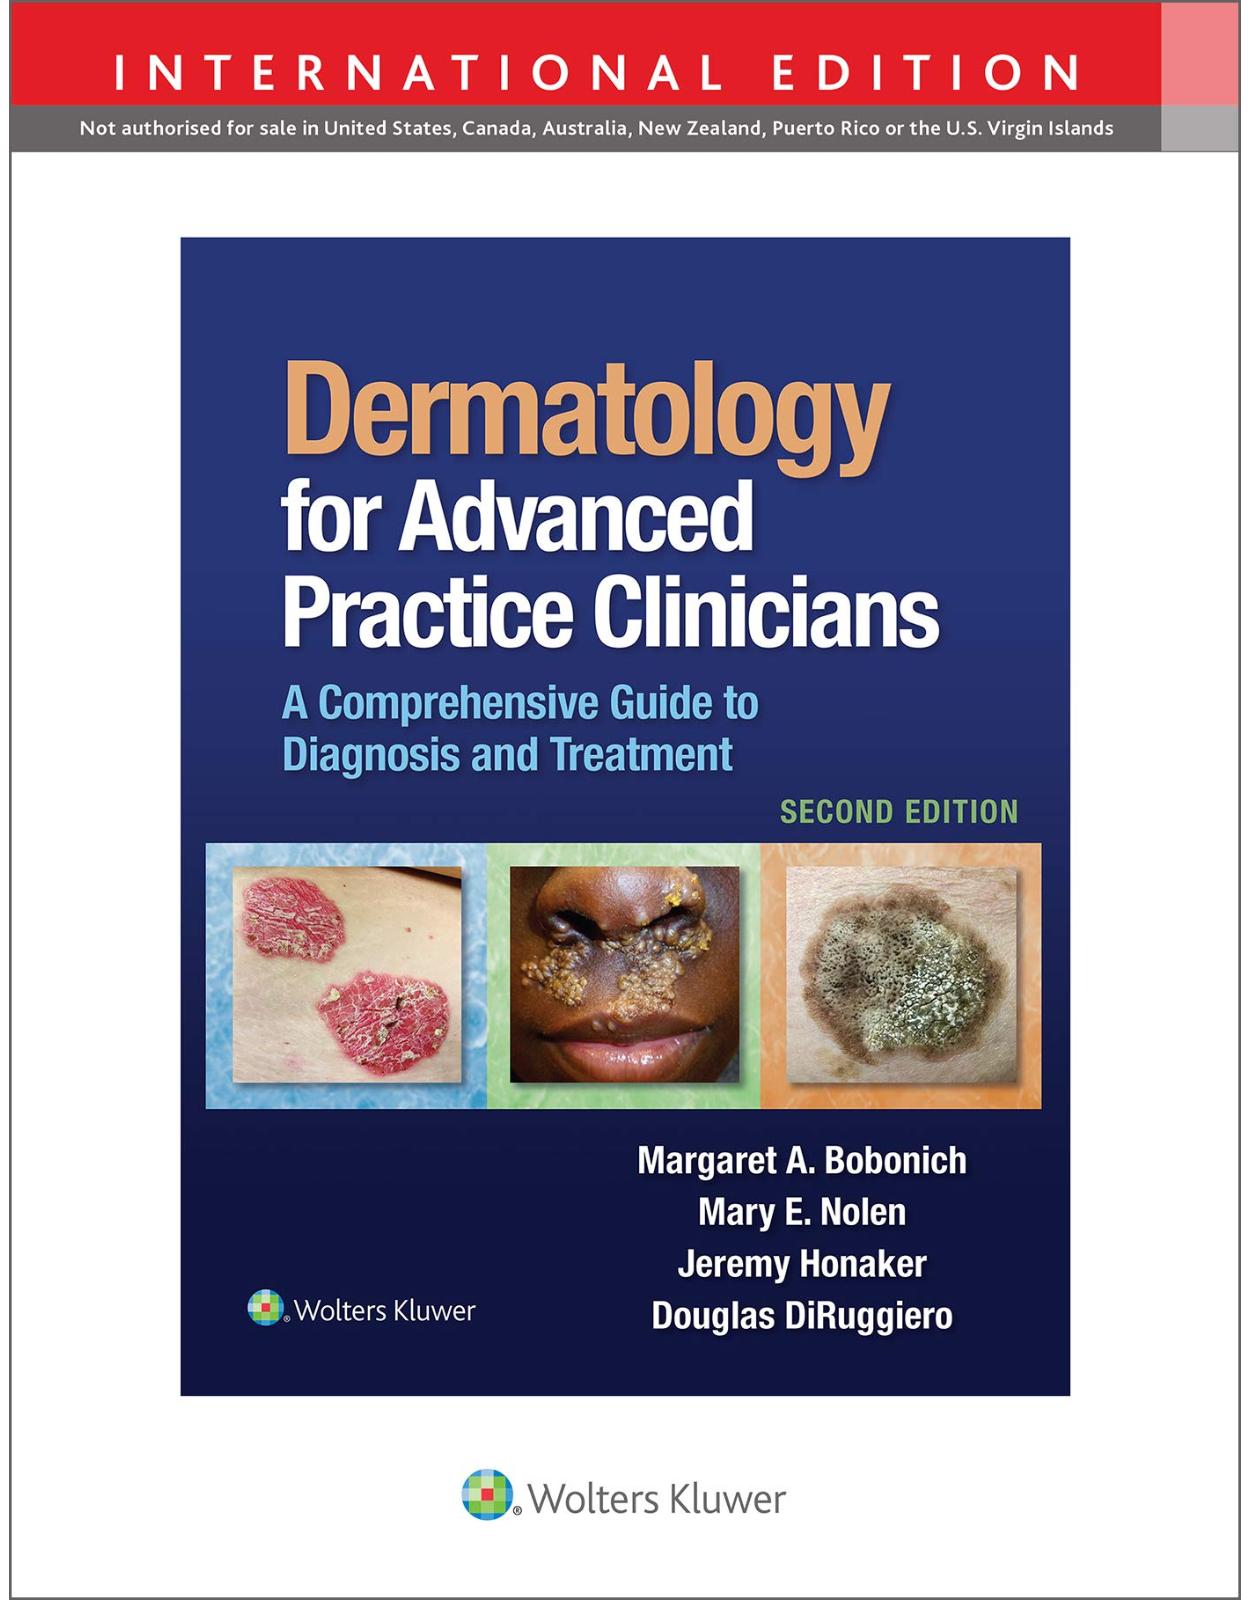 Dermatology for Advanced Practice Clinicians: A Practical Approach to Diagnosis and Management